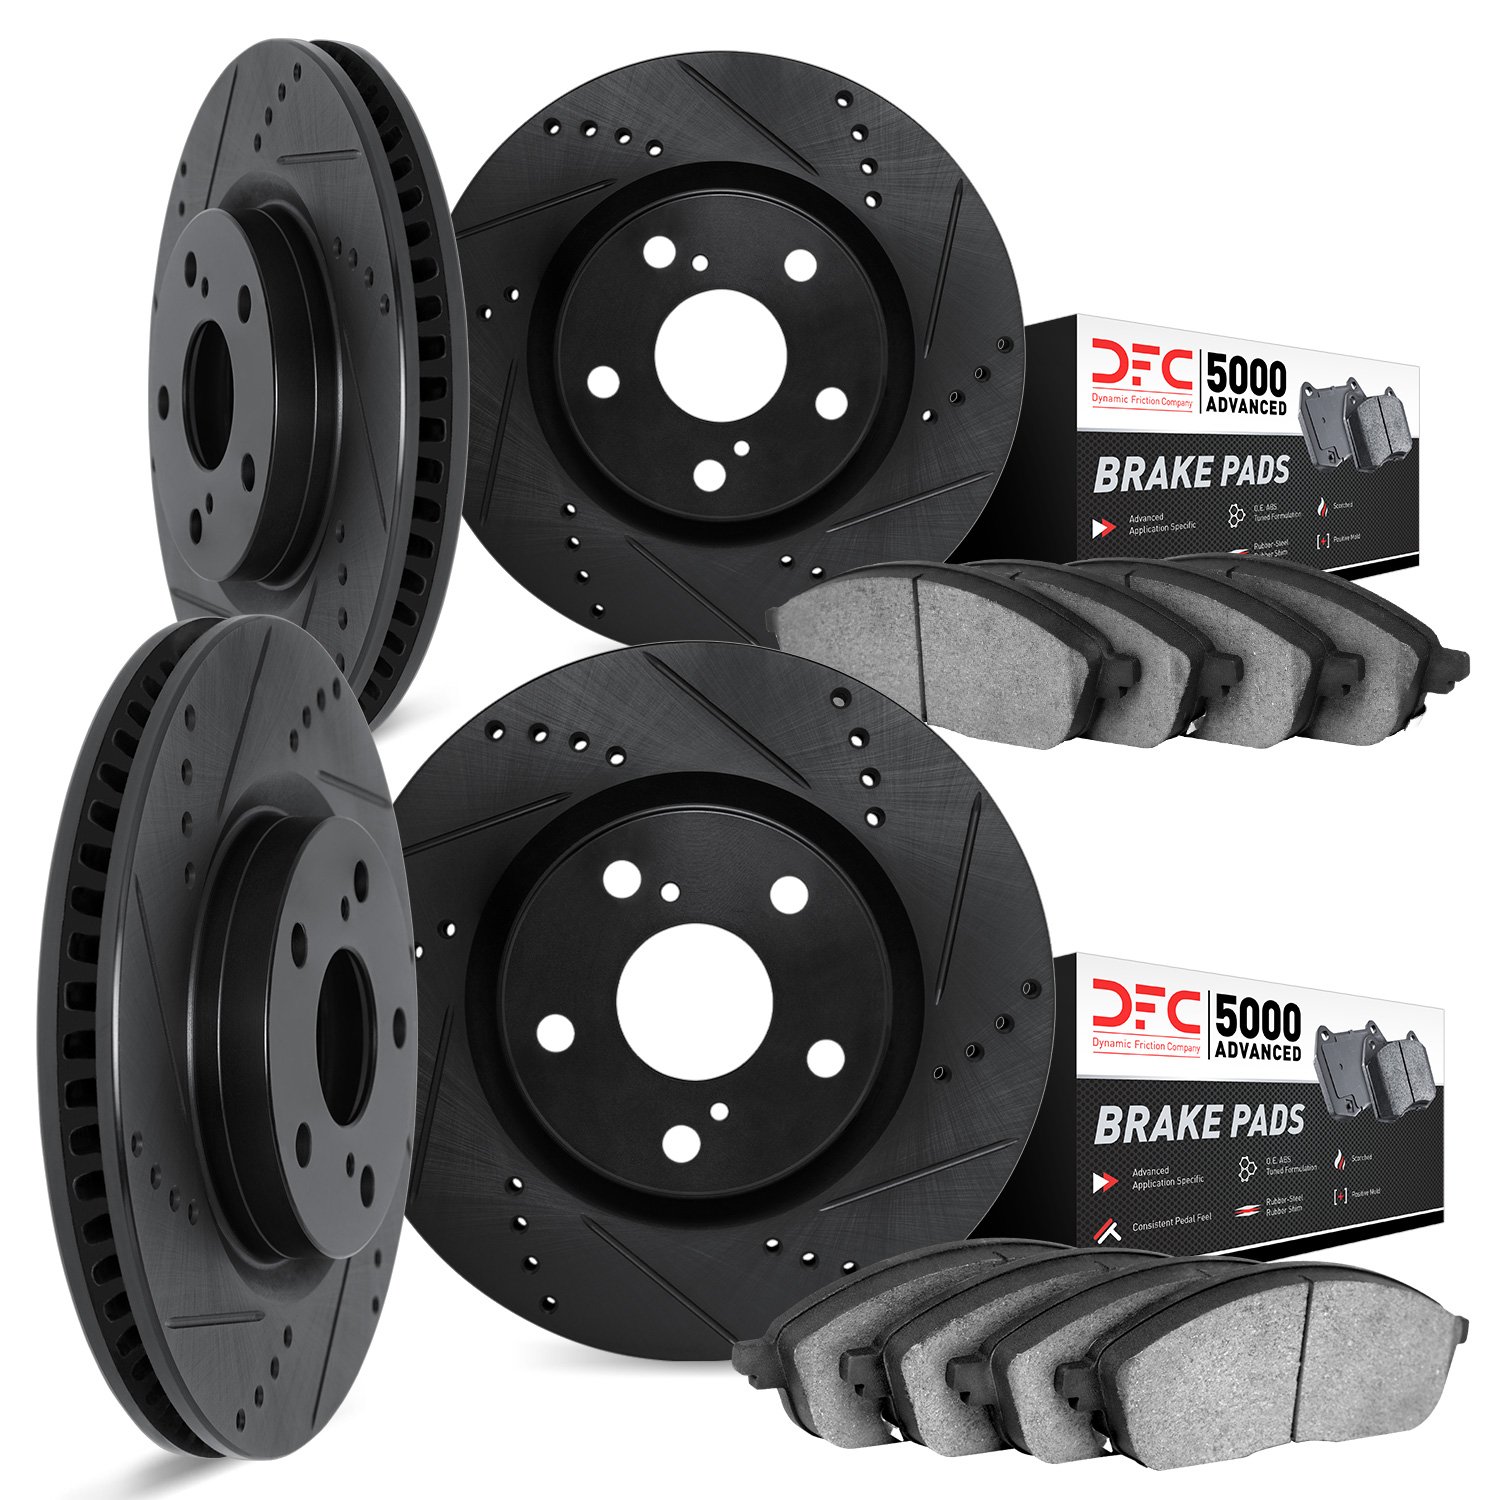 8504-11014 Drilled/Slotted Brake Rotors w/5000 Advanced Brake Pads Kit [Black], 2006-2009 Land Rover, Position: Front and Rear